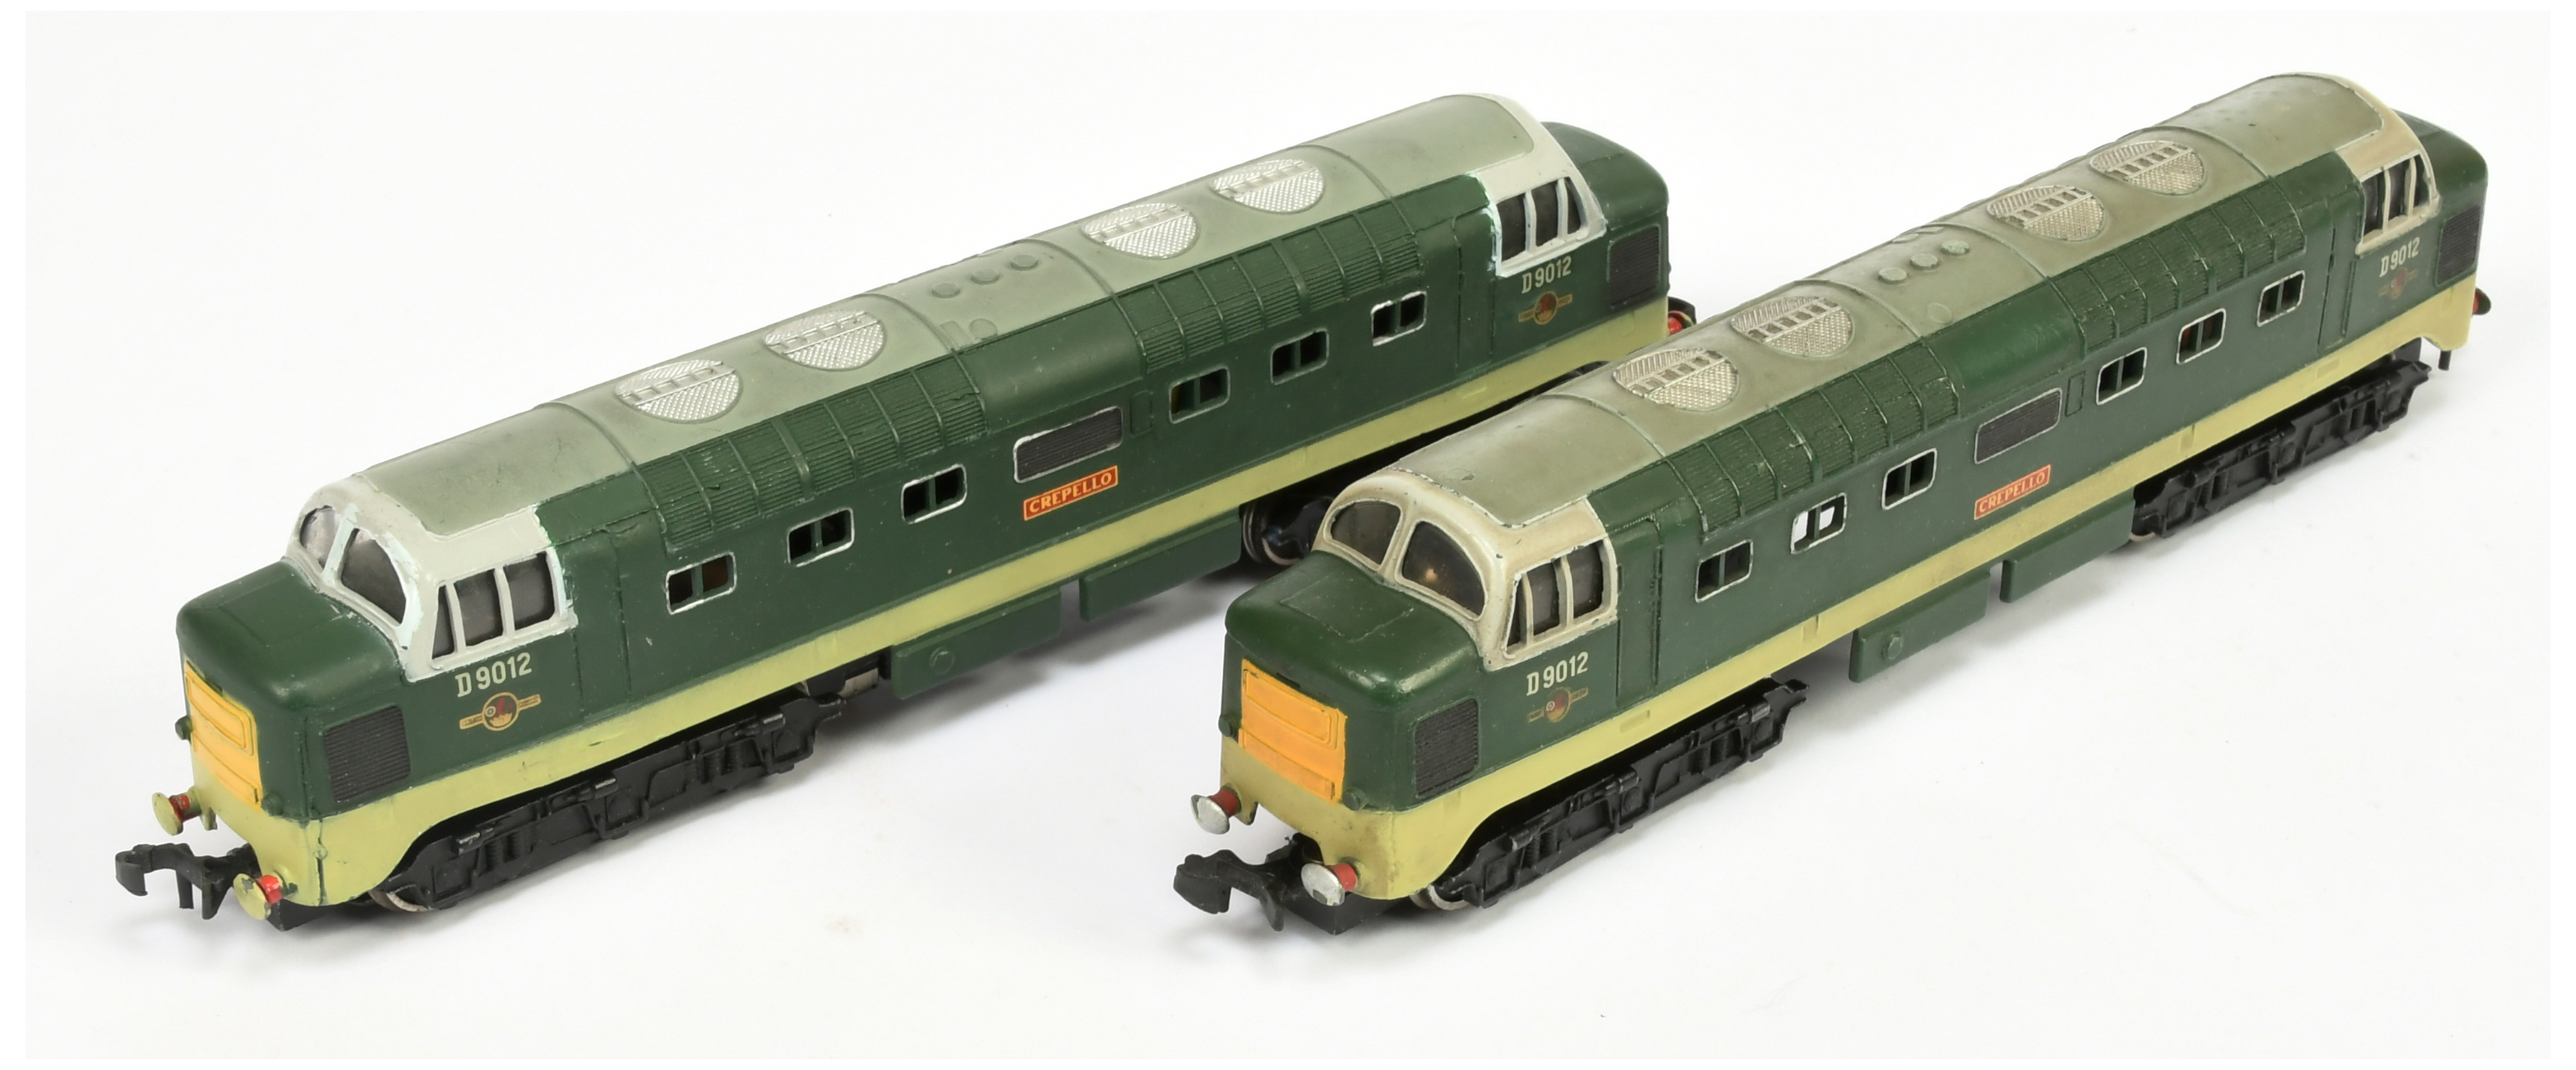 Hornby Dublo 3-rail pair of 2234 Co-Co two-tone green Deltic Diesel Locomotive No. D9012 "Crepello"